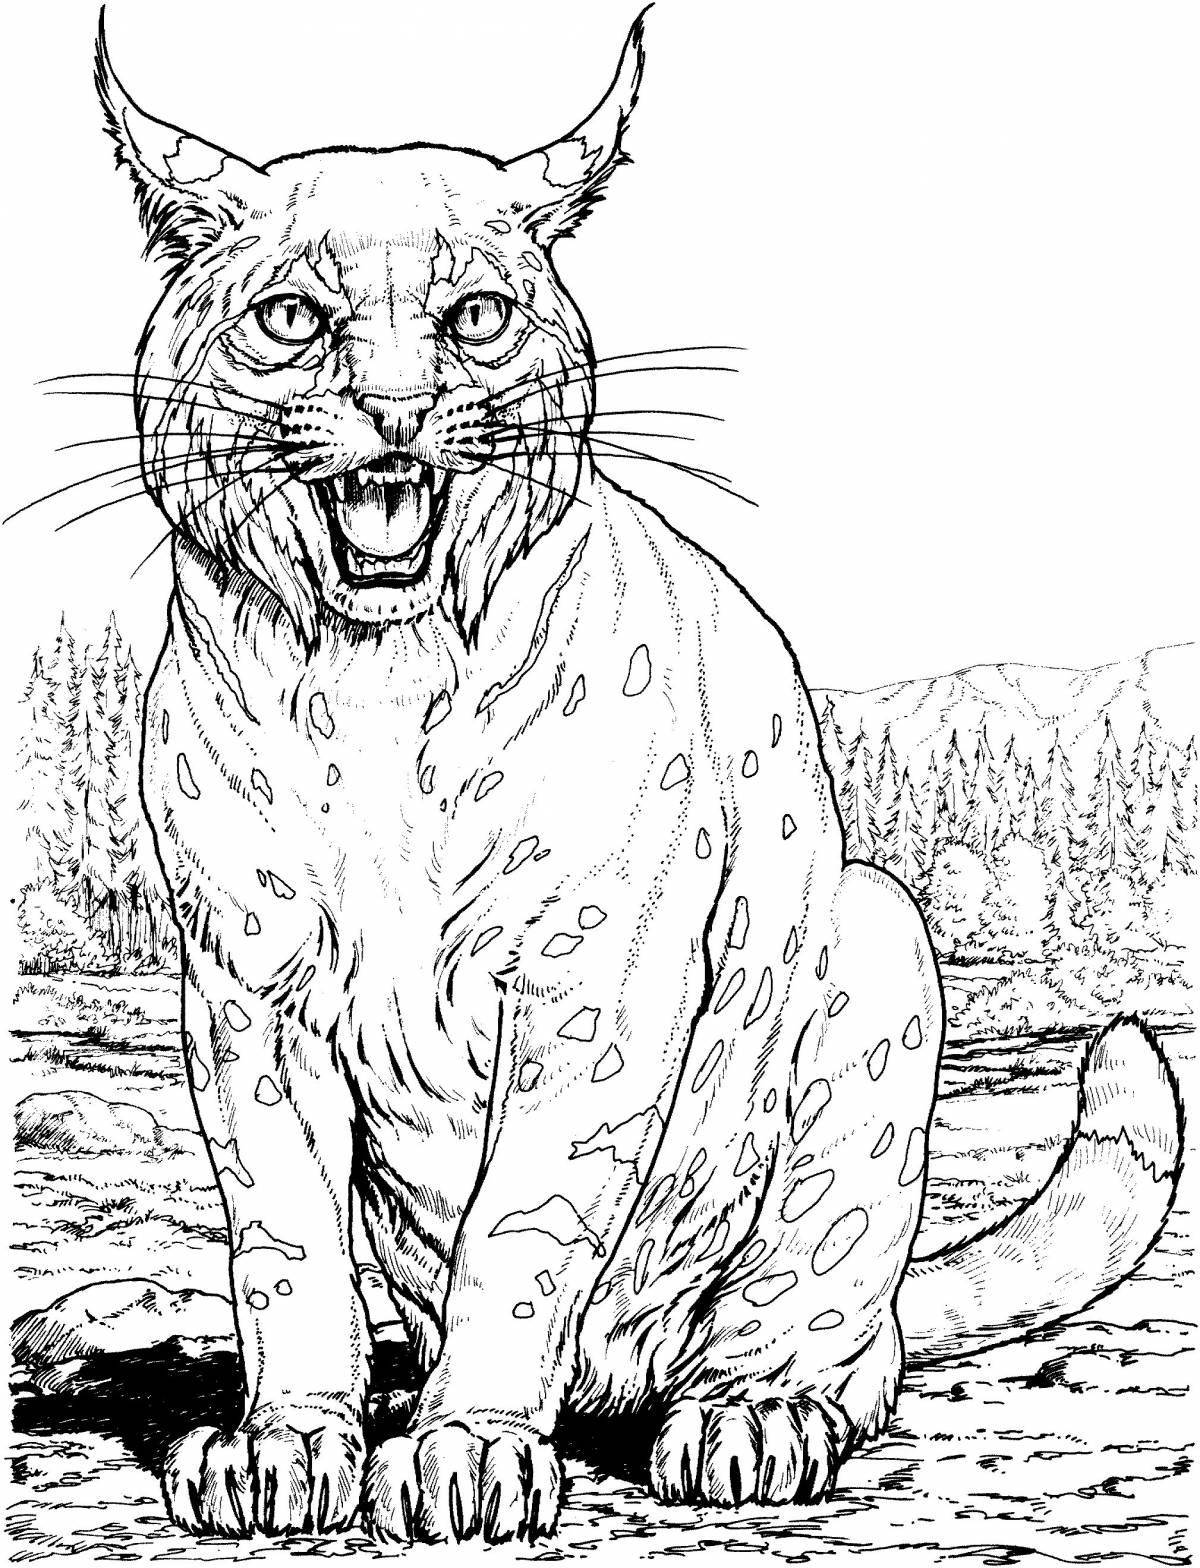 Coloring pages brutala - shiny